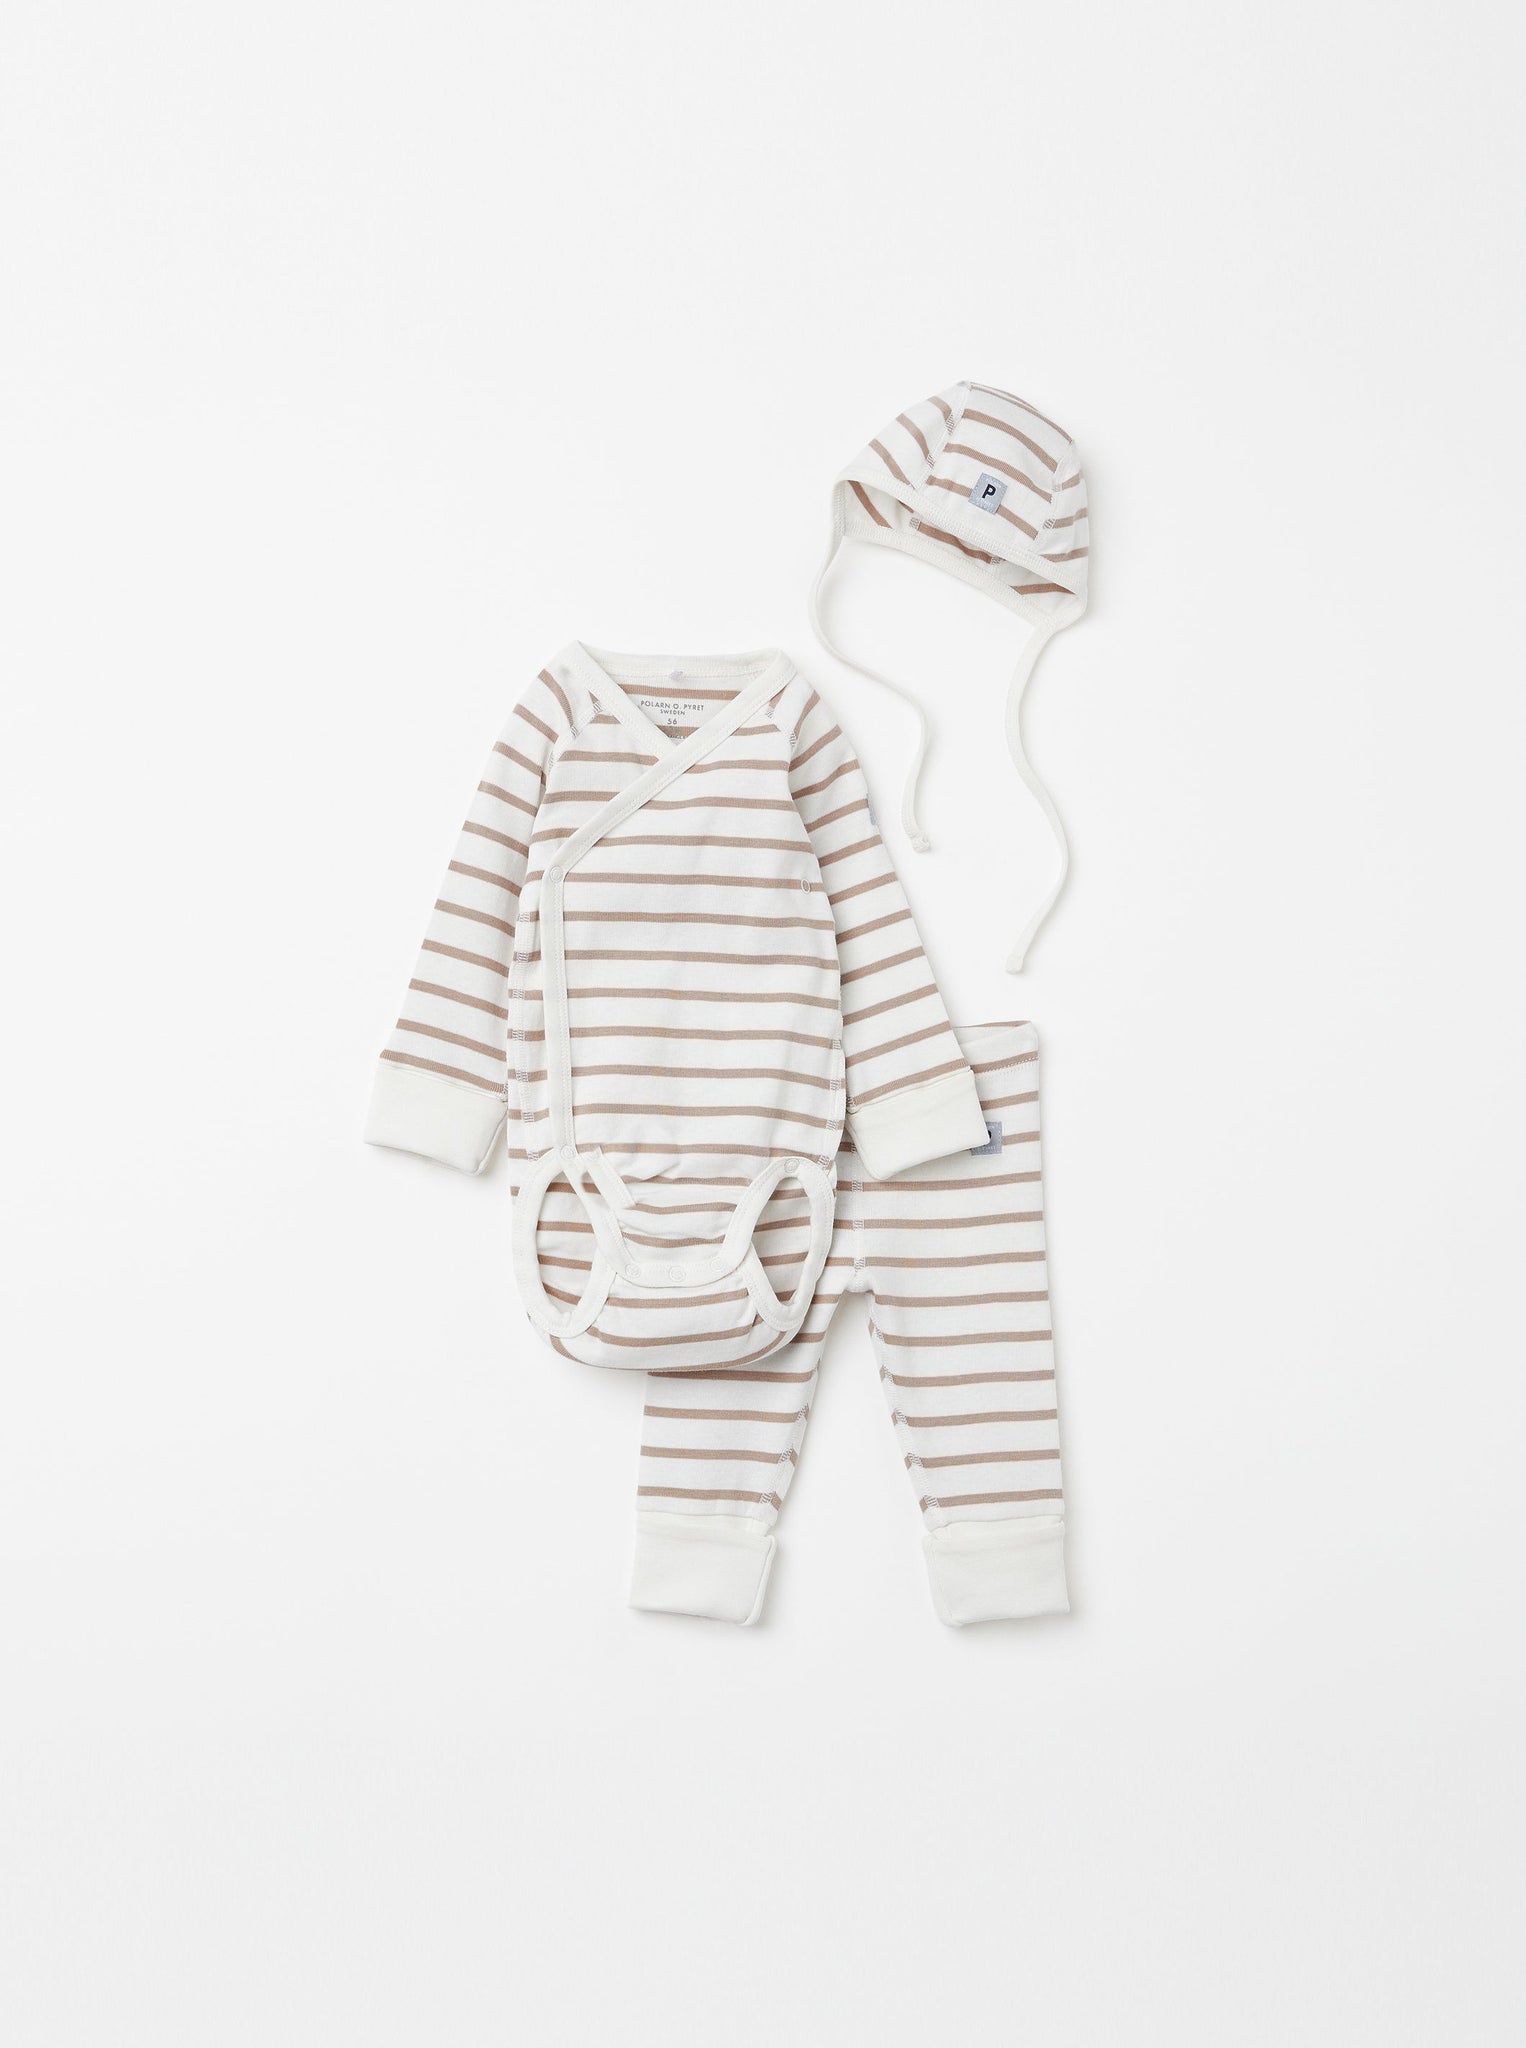 Organic Cotton Newborn Baby Giftset from the Polarn O. Pyret Kidswear collection. Clothes made using sustainably sourced materials.